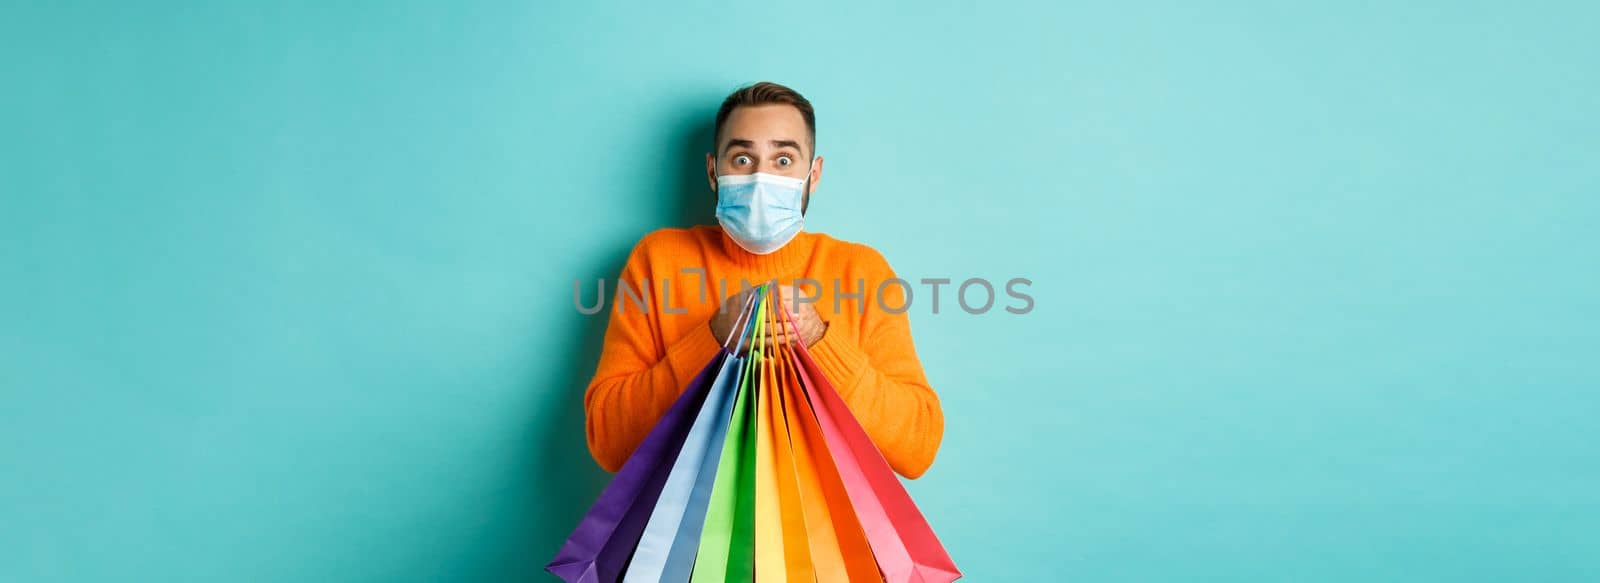 Covid-19, pandemic and lifestyle concept. Excited man in face mask showing shopping bags and rejoicing from discounts, standing over turquoise background.